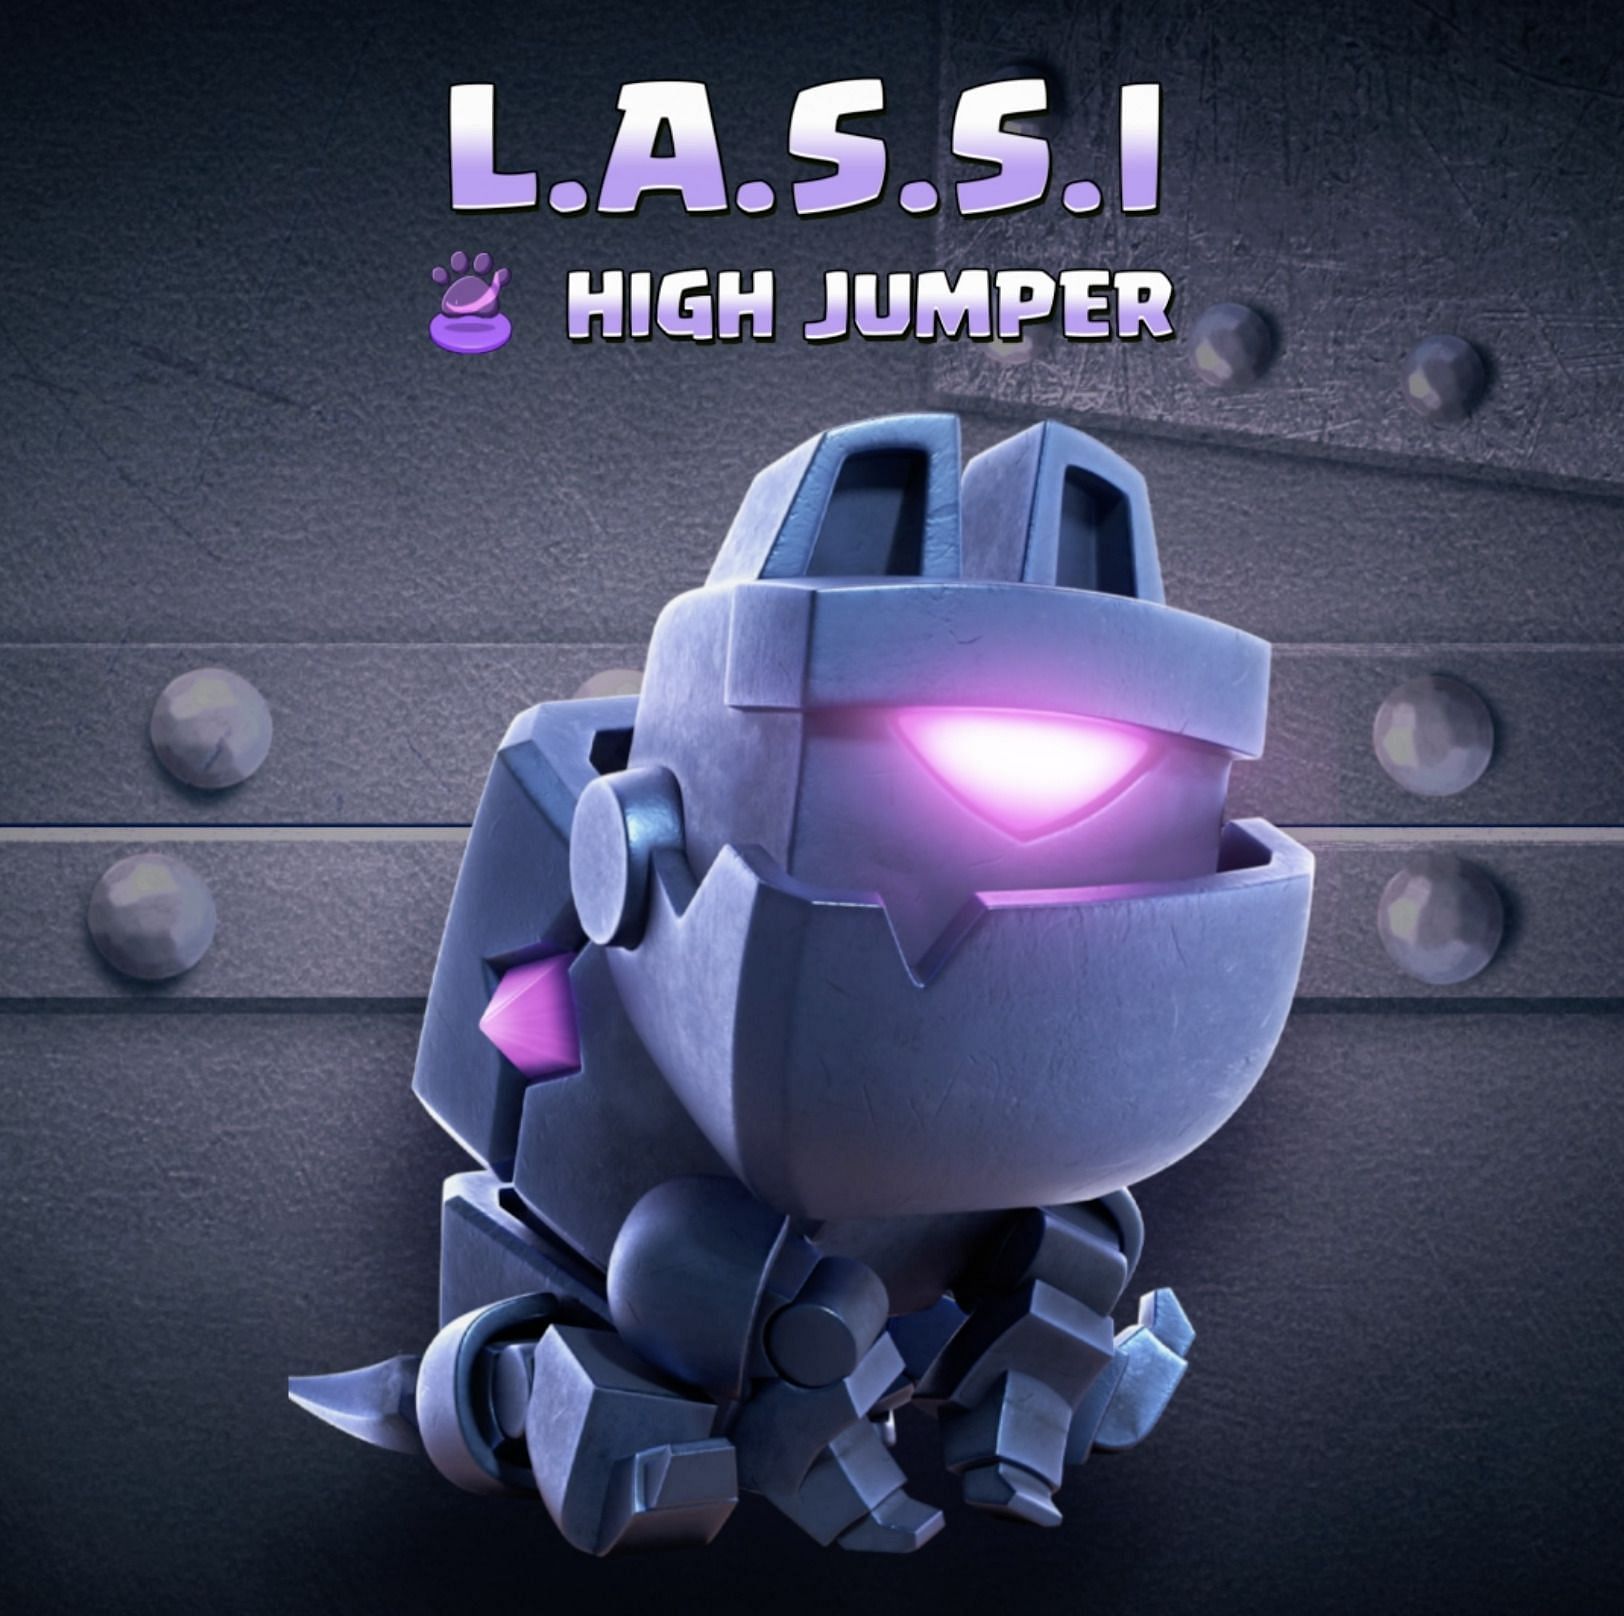 L.A.S.S.I (Image via Twitter/Clash of Clans)